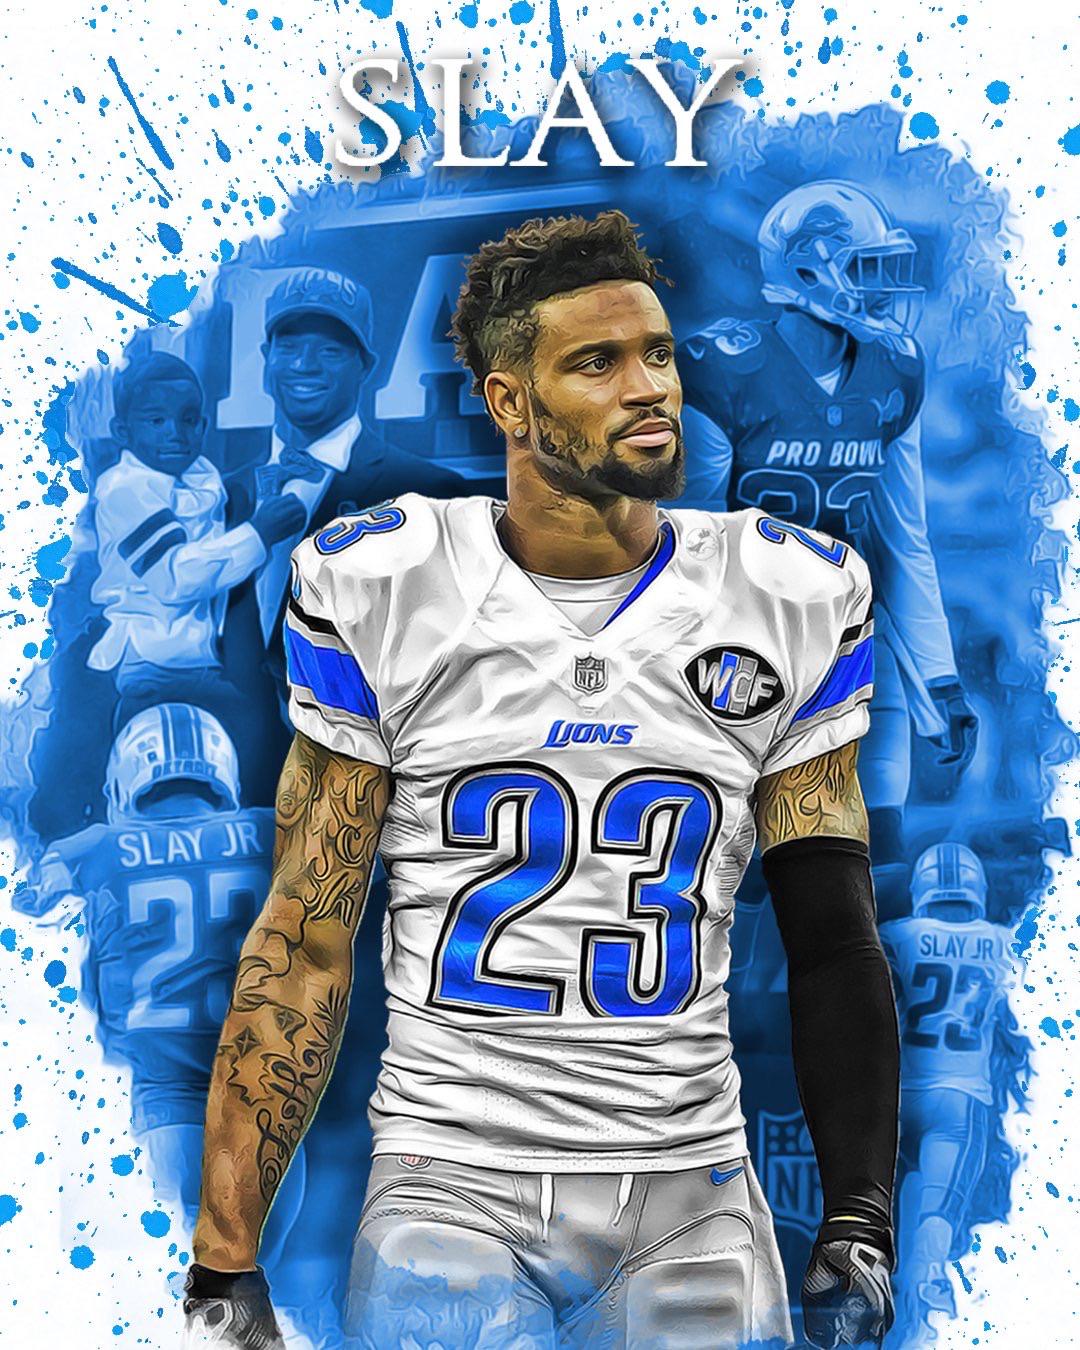 A new edit I just finished of Darius Slay